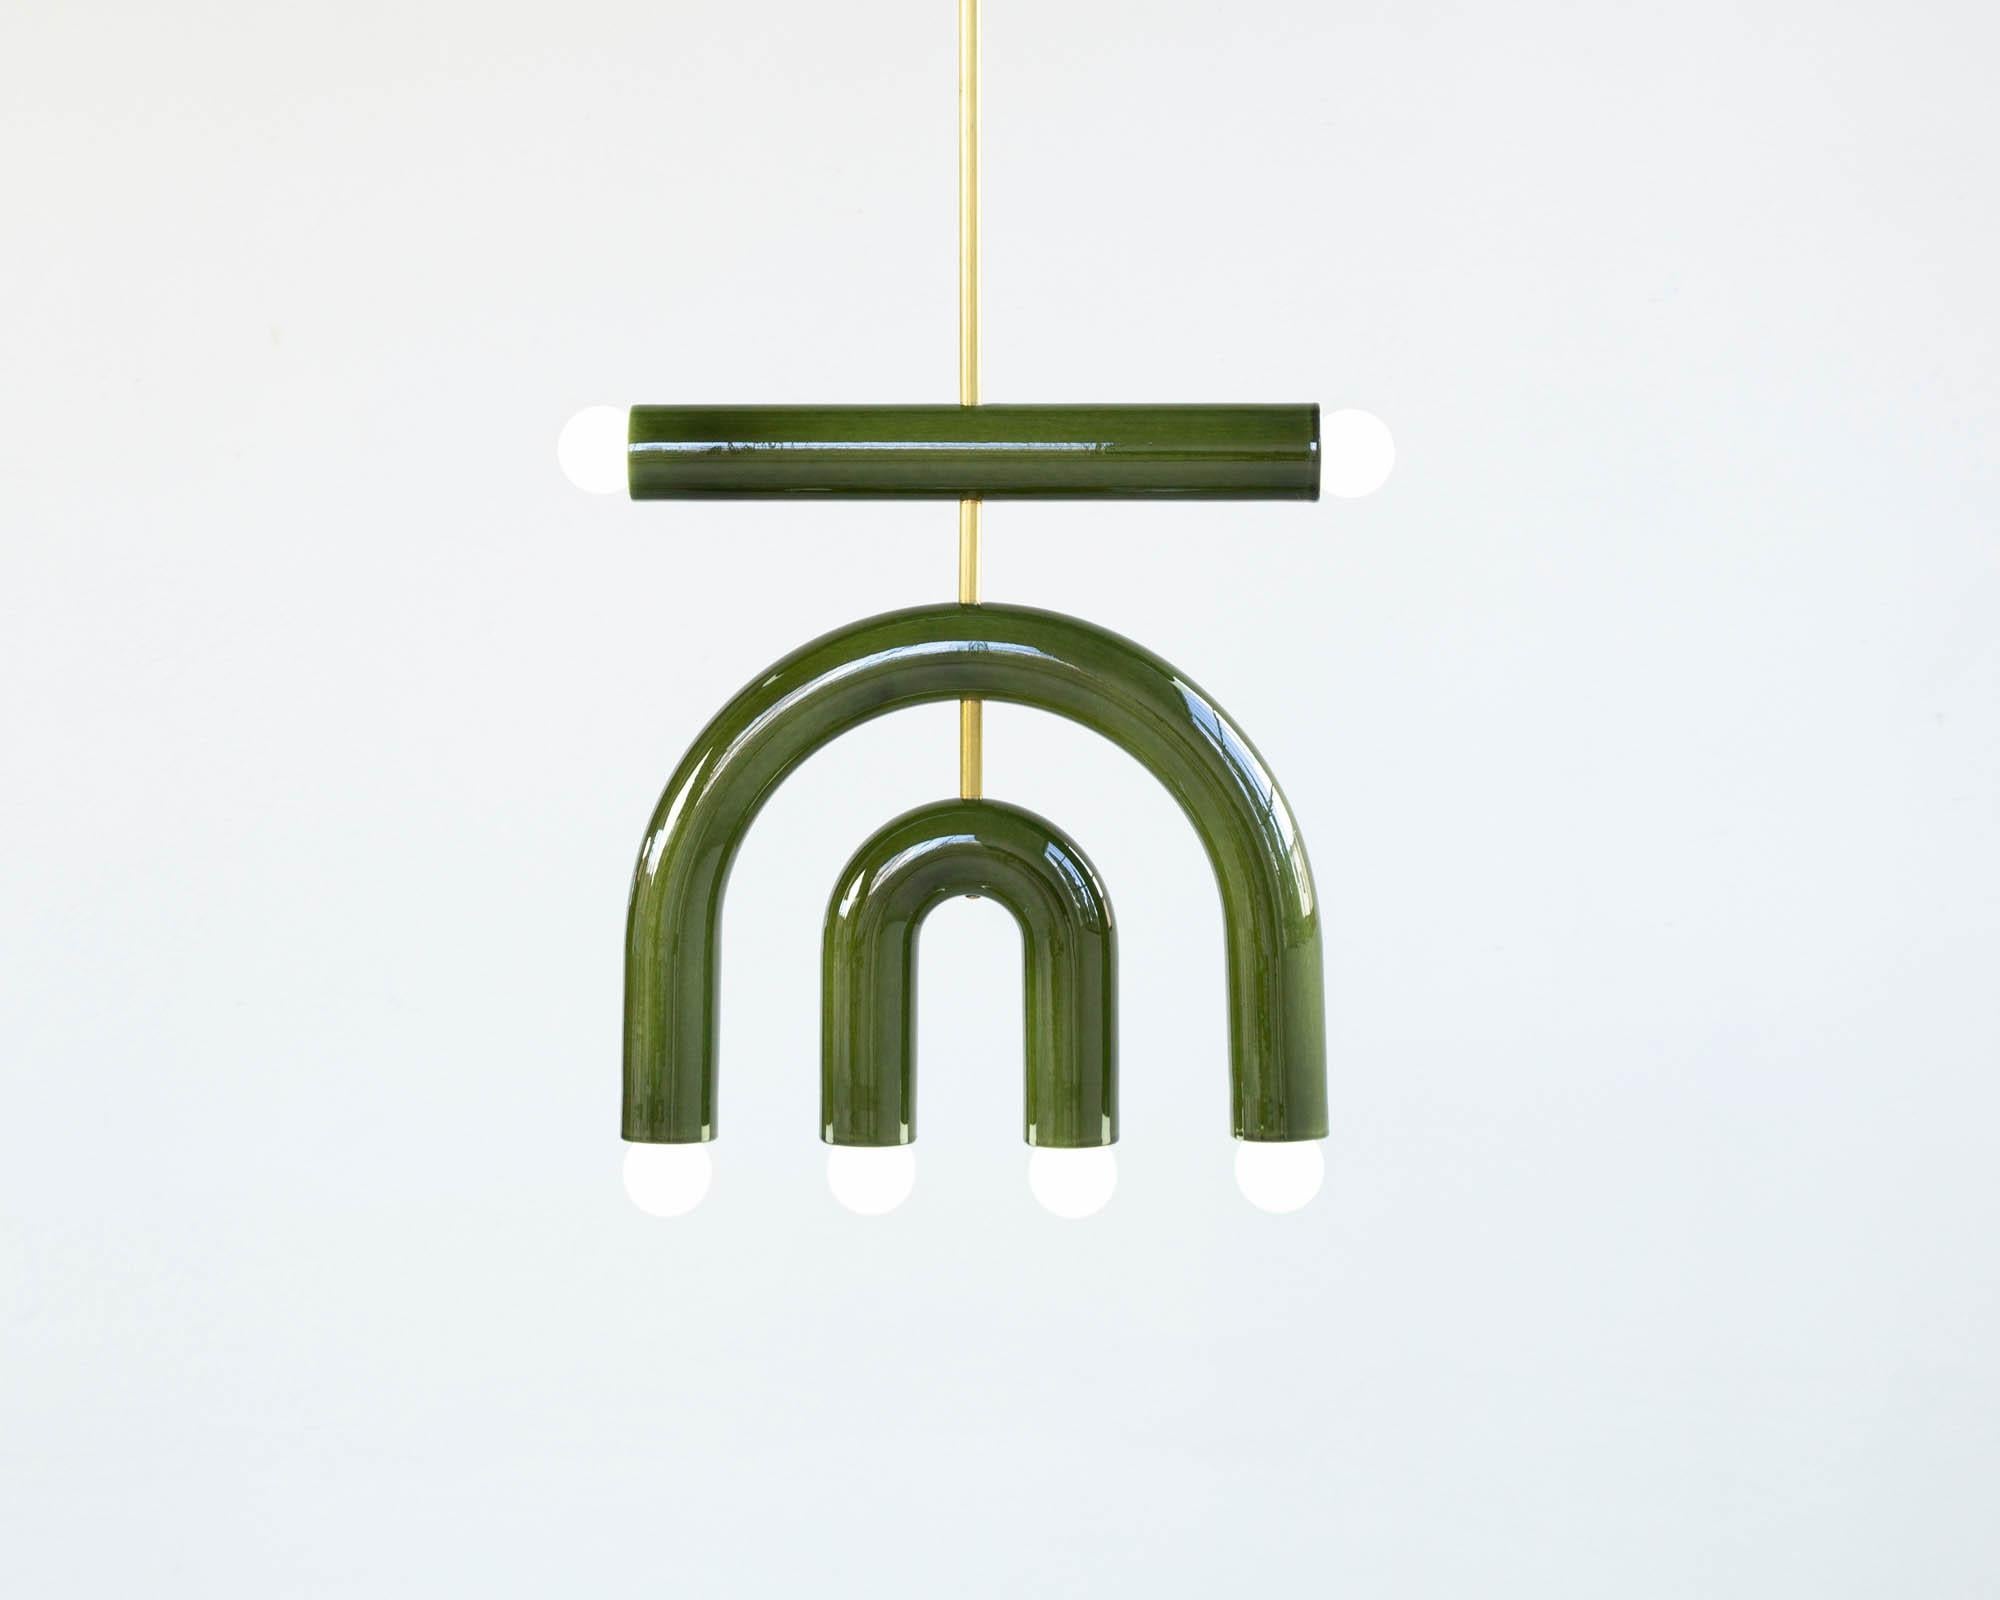 TRN D1 Pendant lamp / ceiling lamp / chandelier 
Signed by Pani Jurek

Dimensions: H37.5 x 35 x 5 cm
Model Shown: Green 

Bulb (not included): E27/E26, compatible with US electric system

Materials: Hand-glazed ceramic and brass
Rod: brass, length